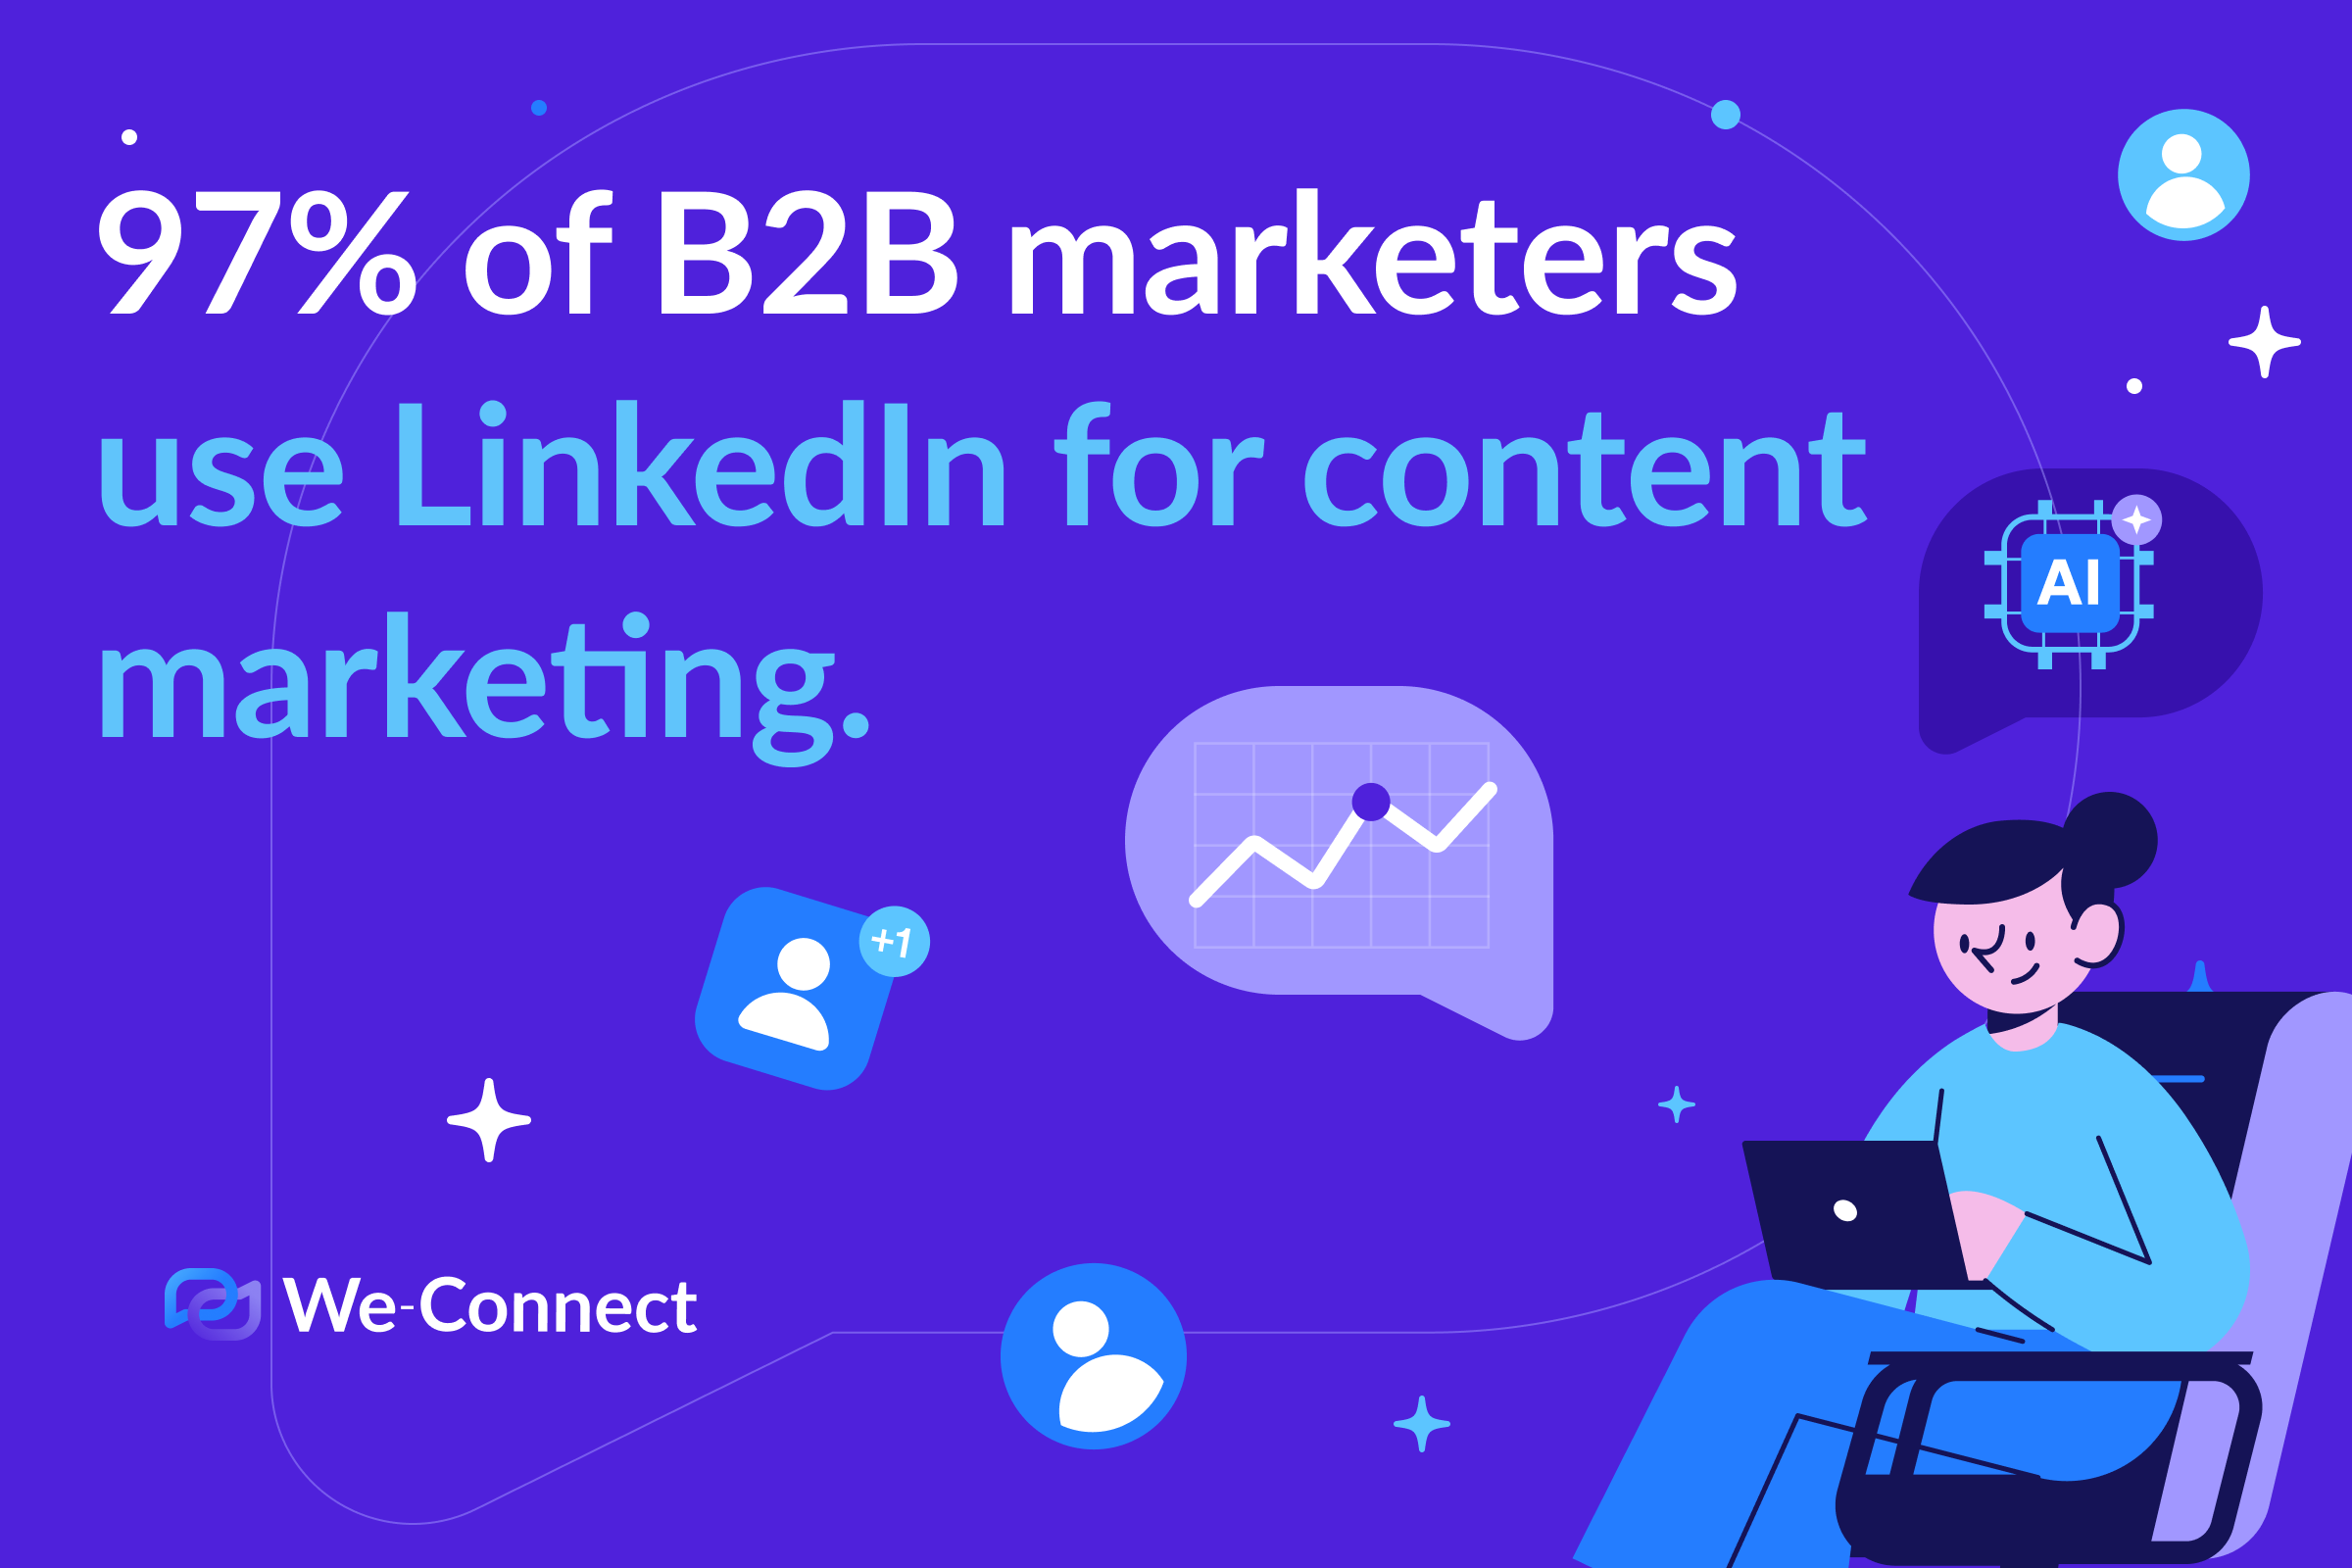 97% of B2B marketers use LinkedIn for content marketing.